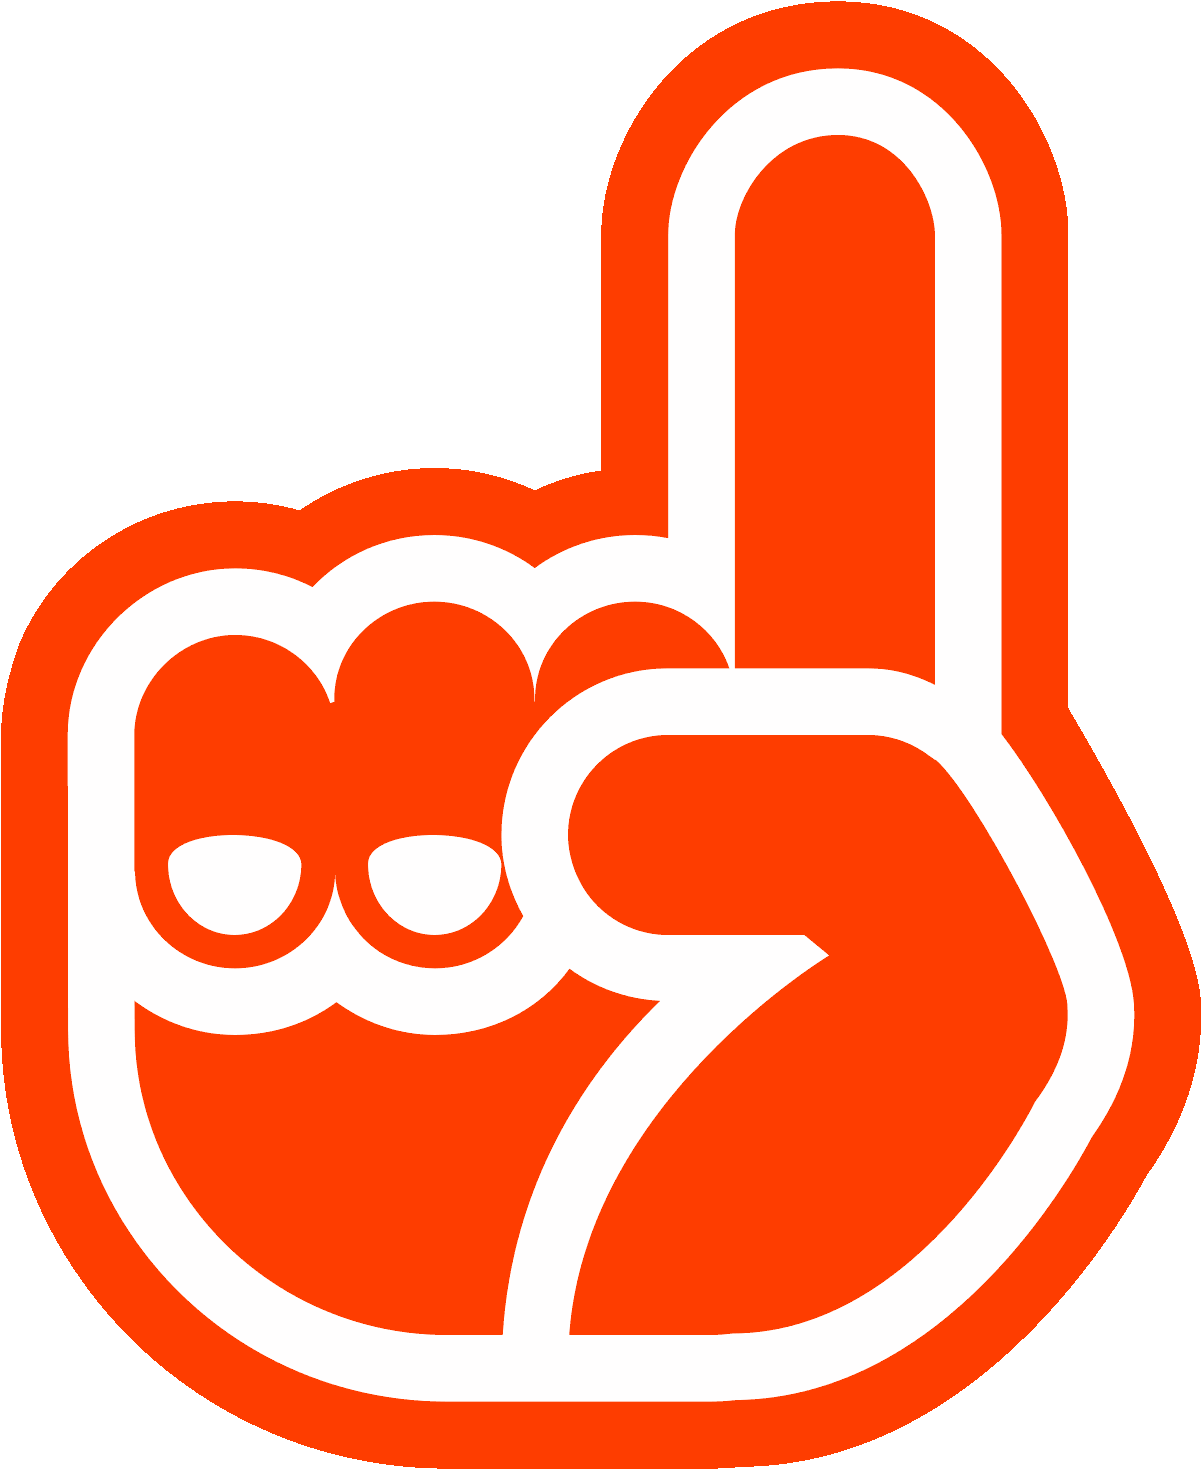 Foam Finger Icon at Vectorified.com | Collection of Foam Finger Icon